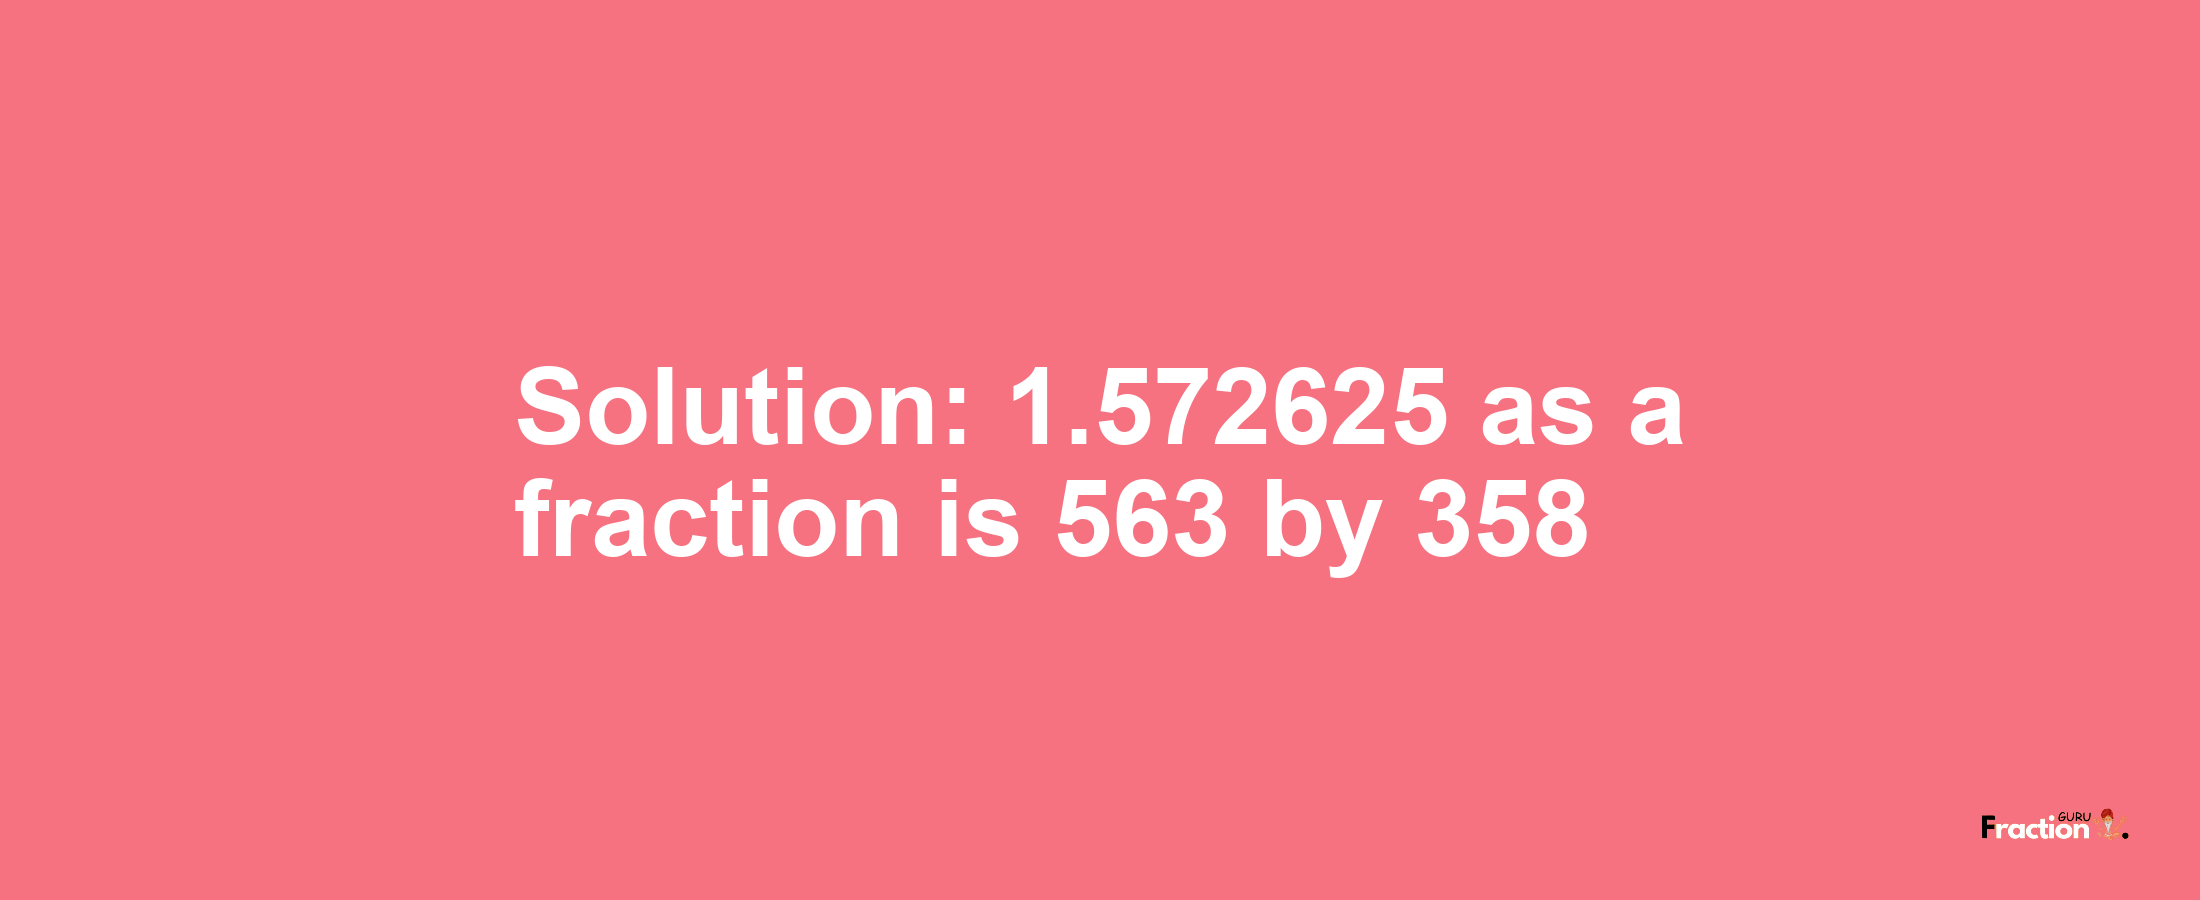 Solution:1.572625 as a fraction is 563/358